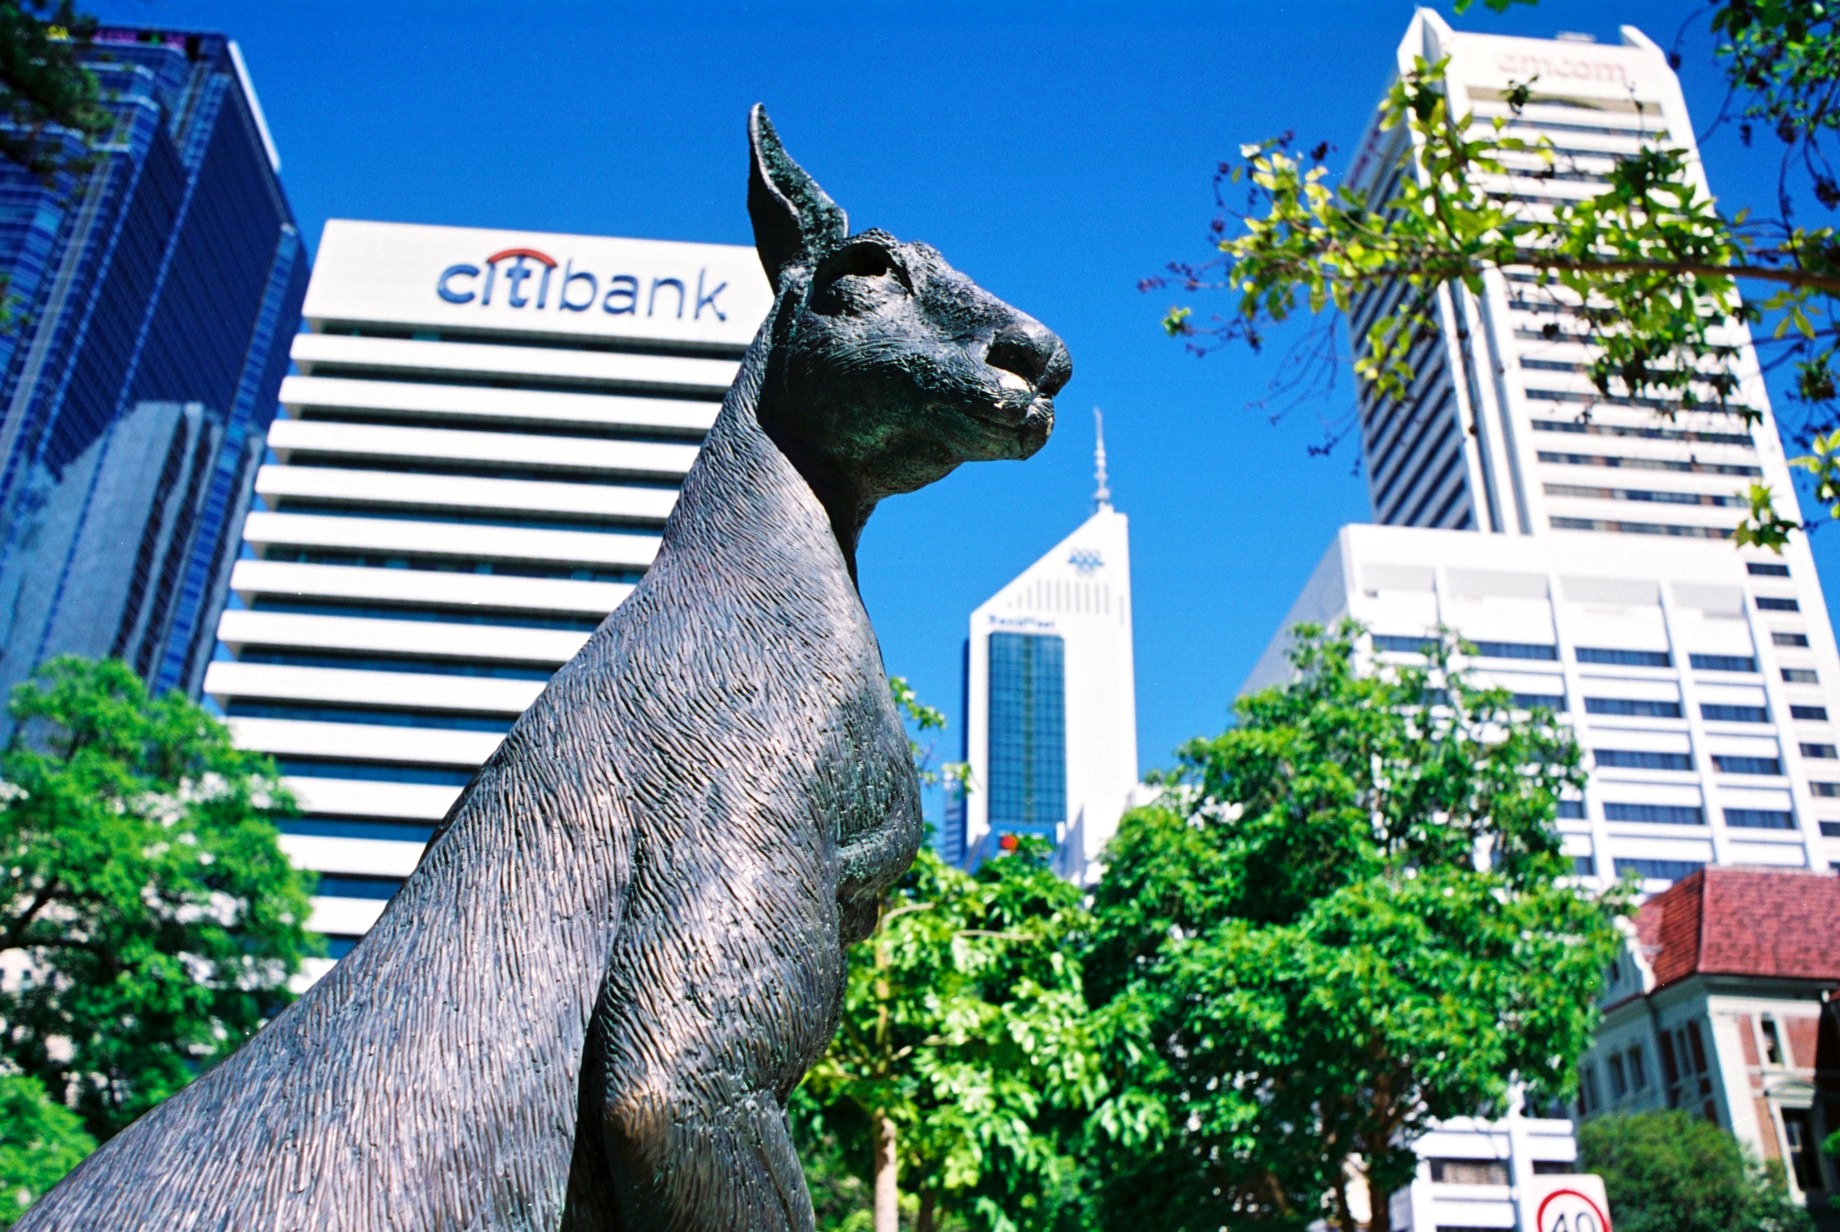 a statue of a kangaroo in front of some buildings